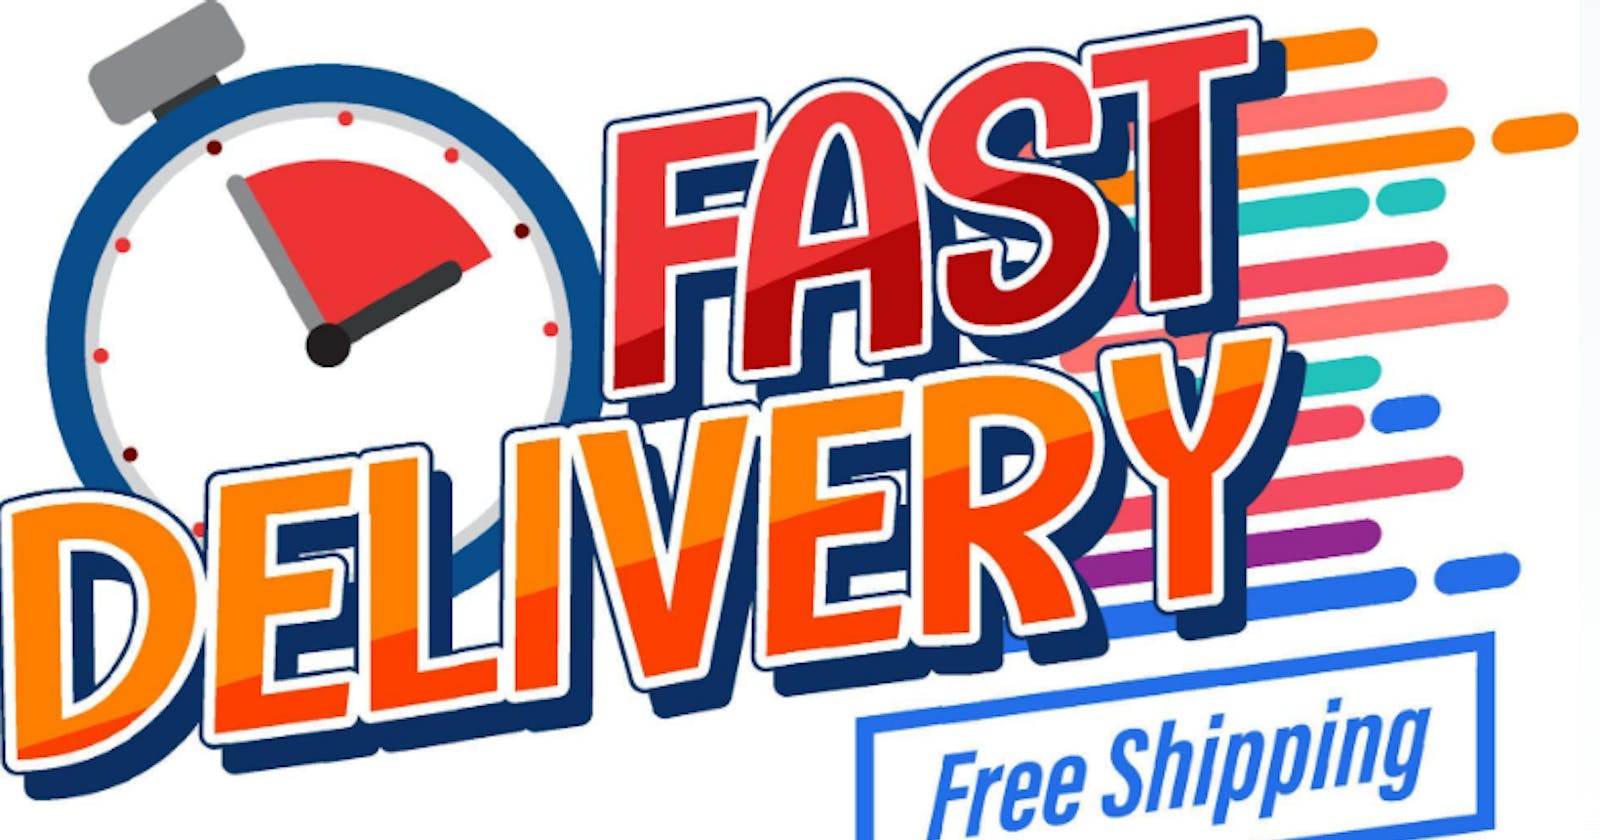 Importance Of Fast and Free Shipping in the eCommerce industry